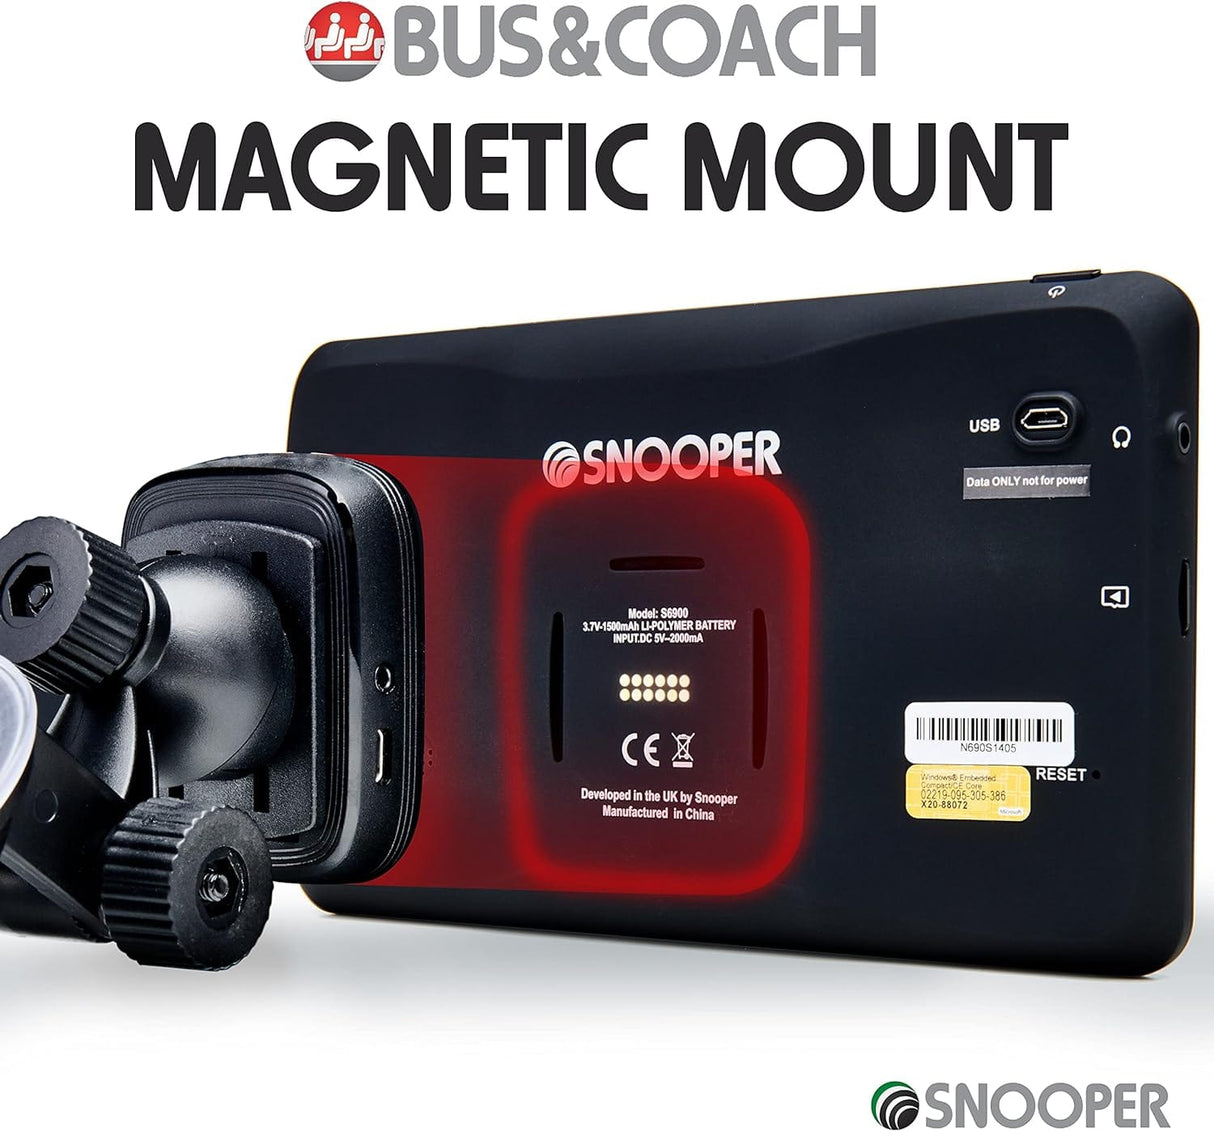 Snooper Sat Navs Snooper S6900 Bus & Coach-Pro Navigation System with 7" Widescreen LCD